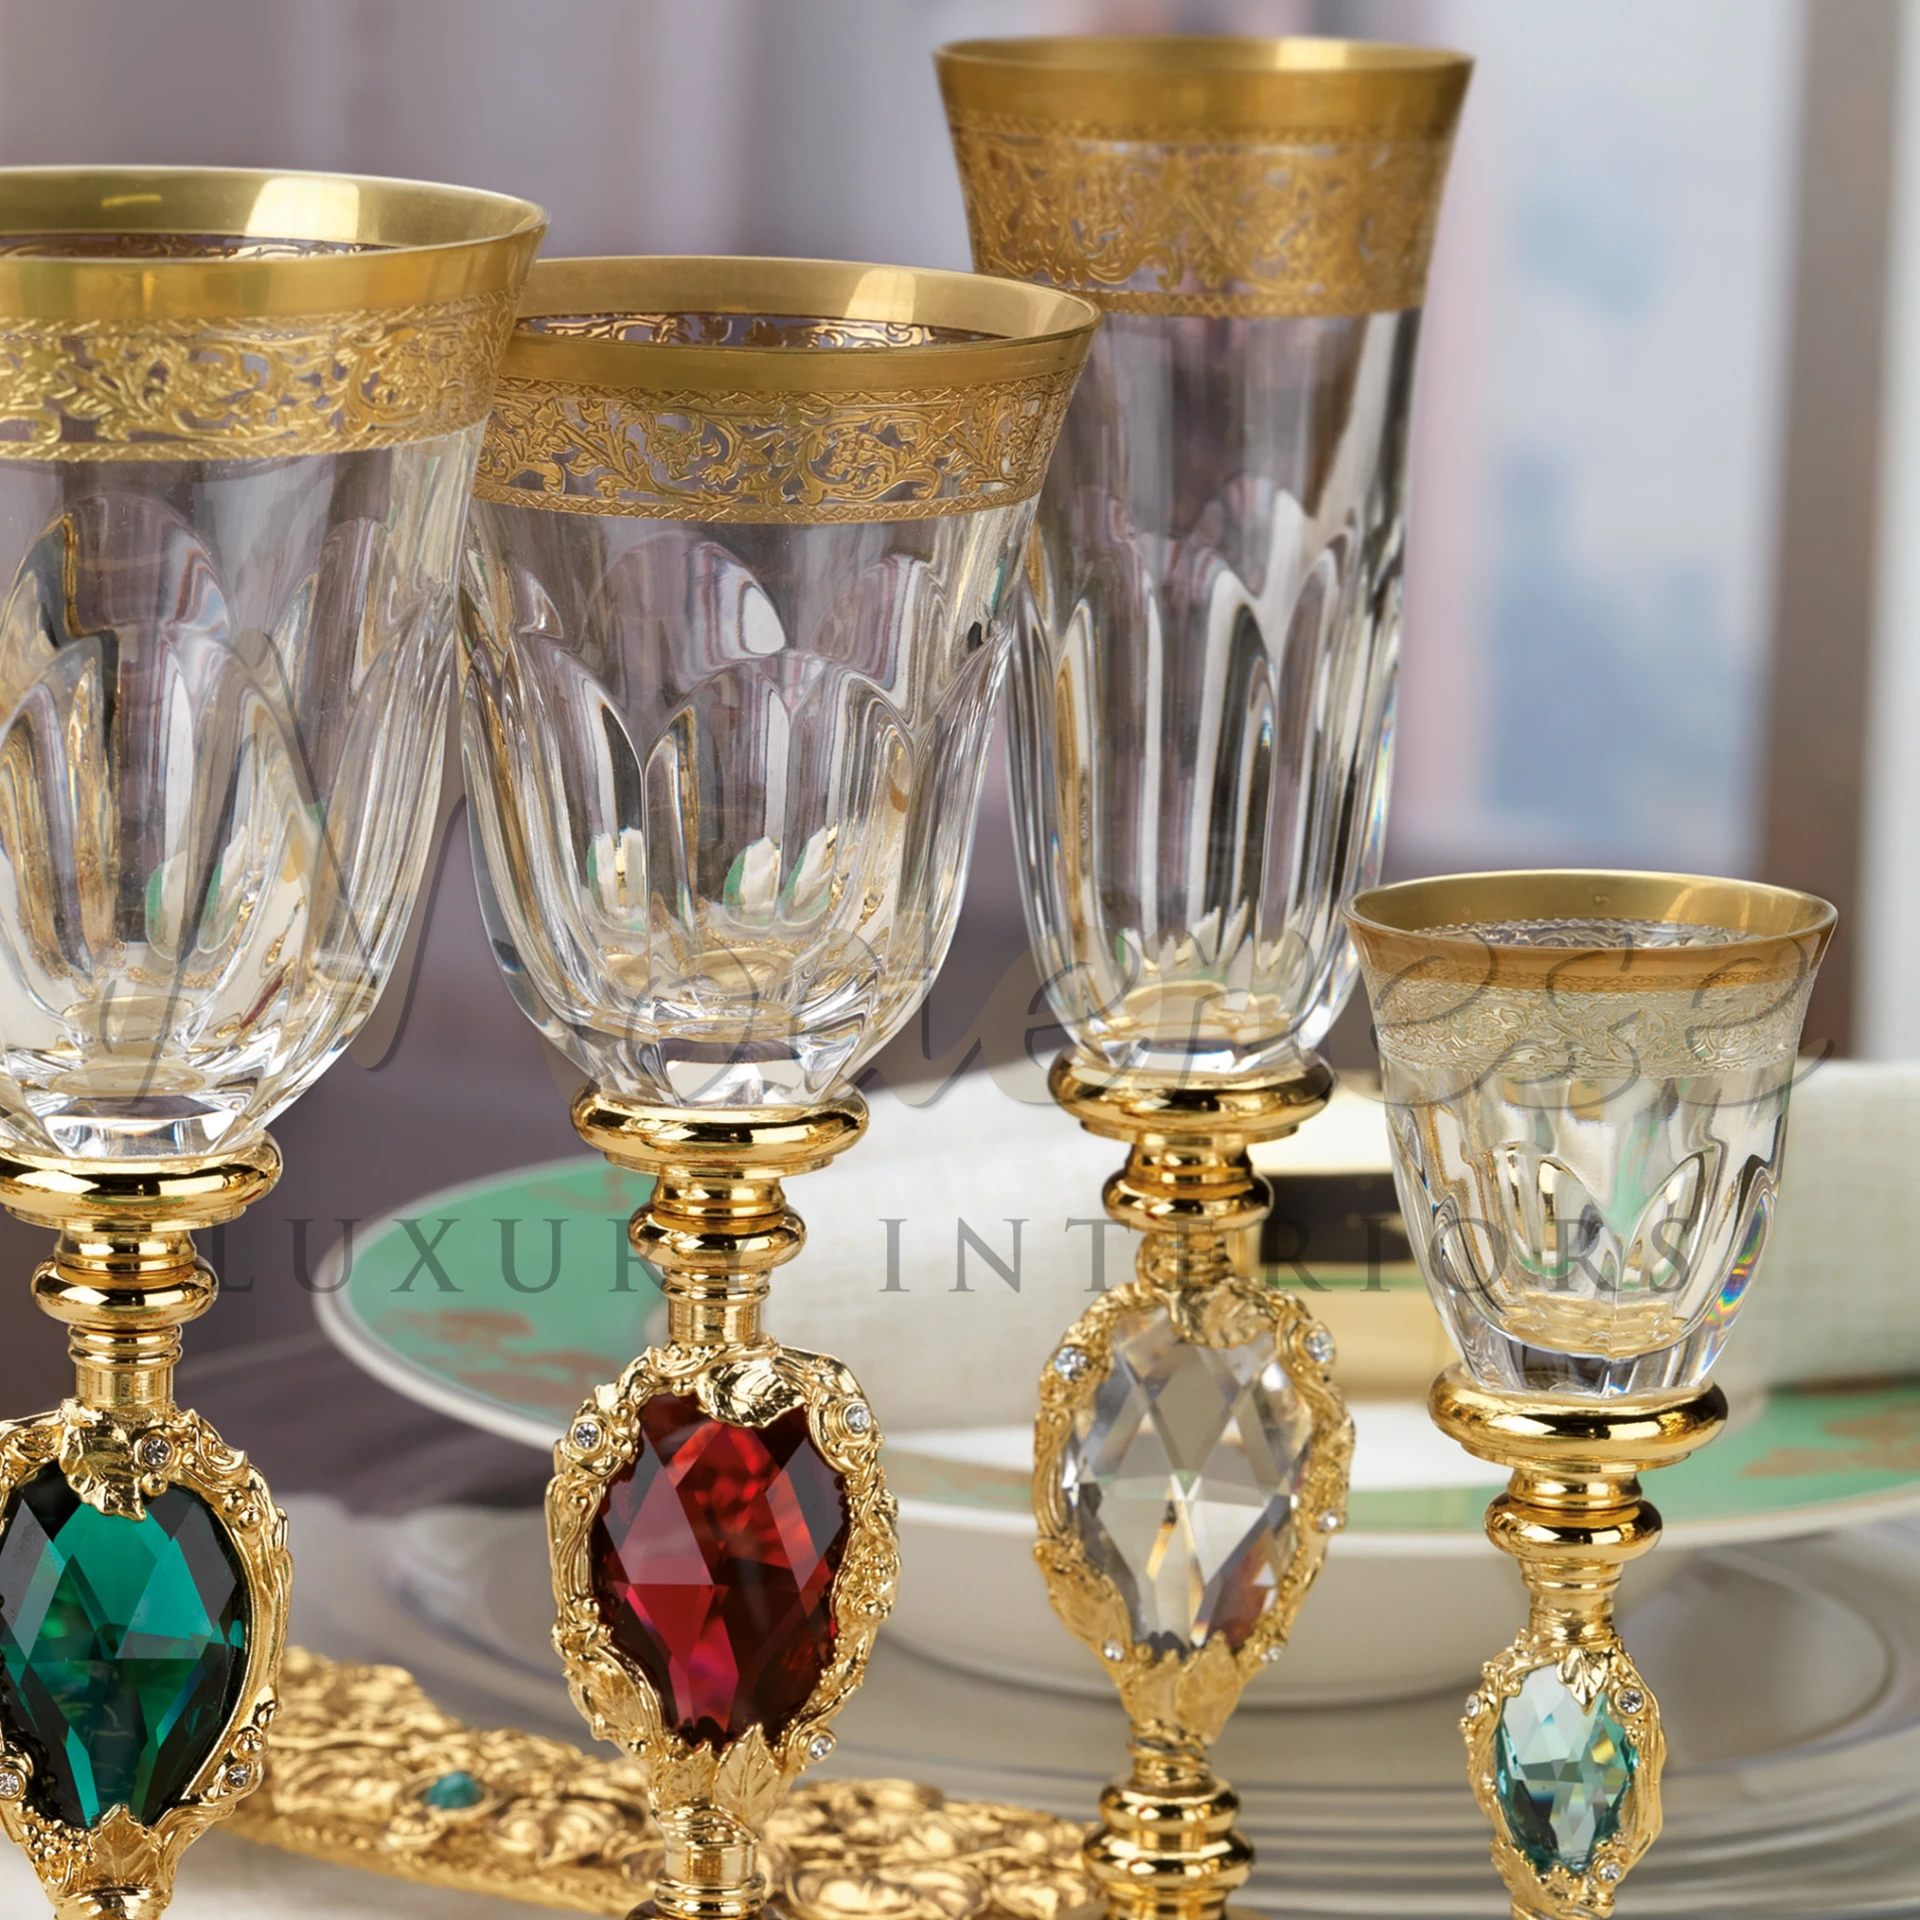 The exquisite crystal glasses with golden rims and gem-embedded stems, part of a lavish table setting.